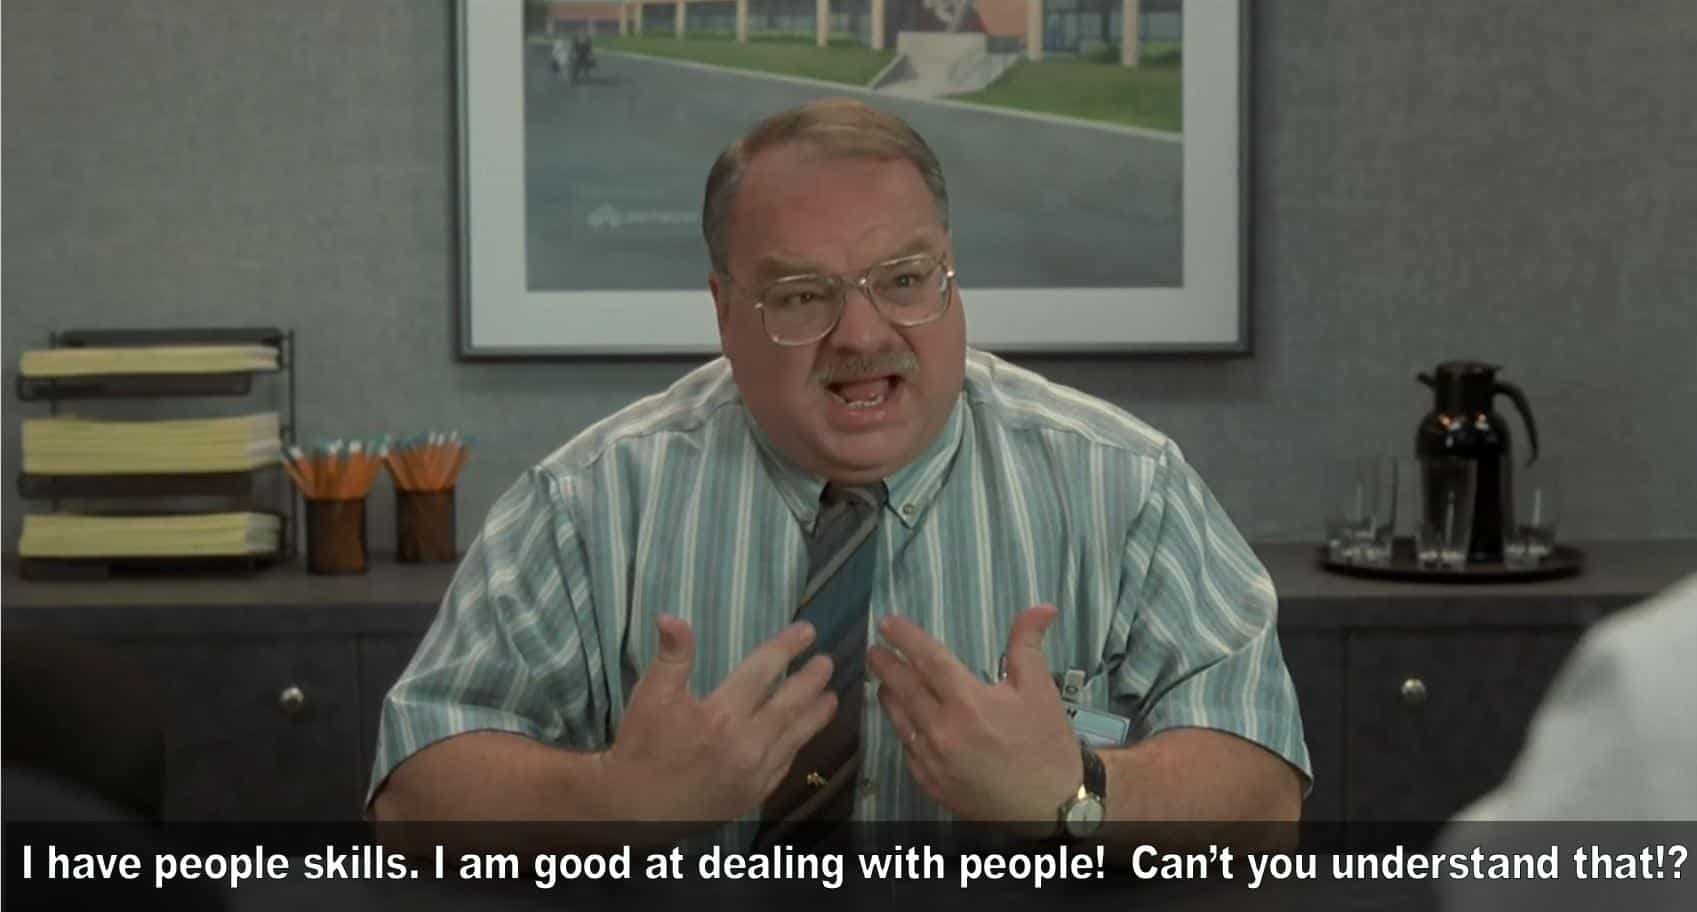 Office Space meme of Tom Smykowski with text: I have people skills. I am good at dealing with people! Can't you understand that!?